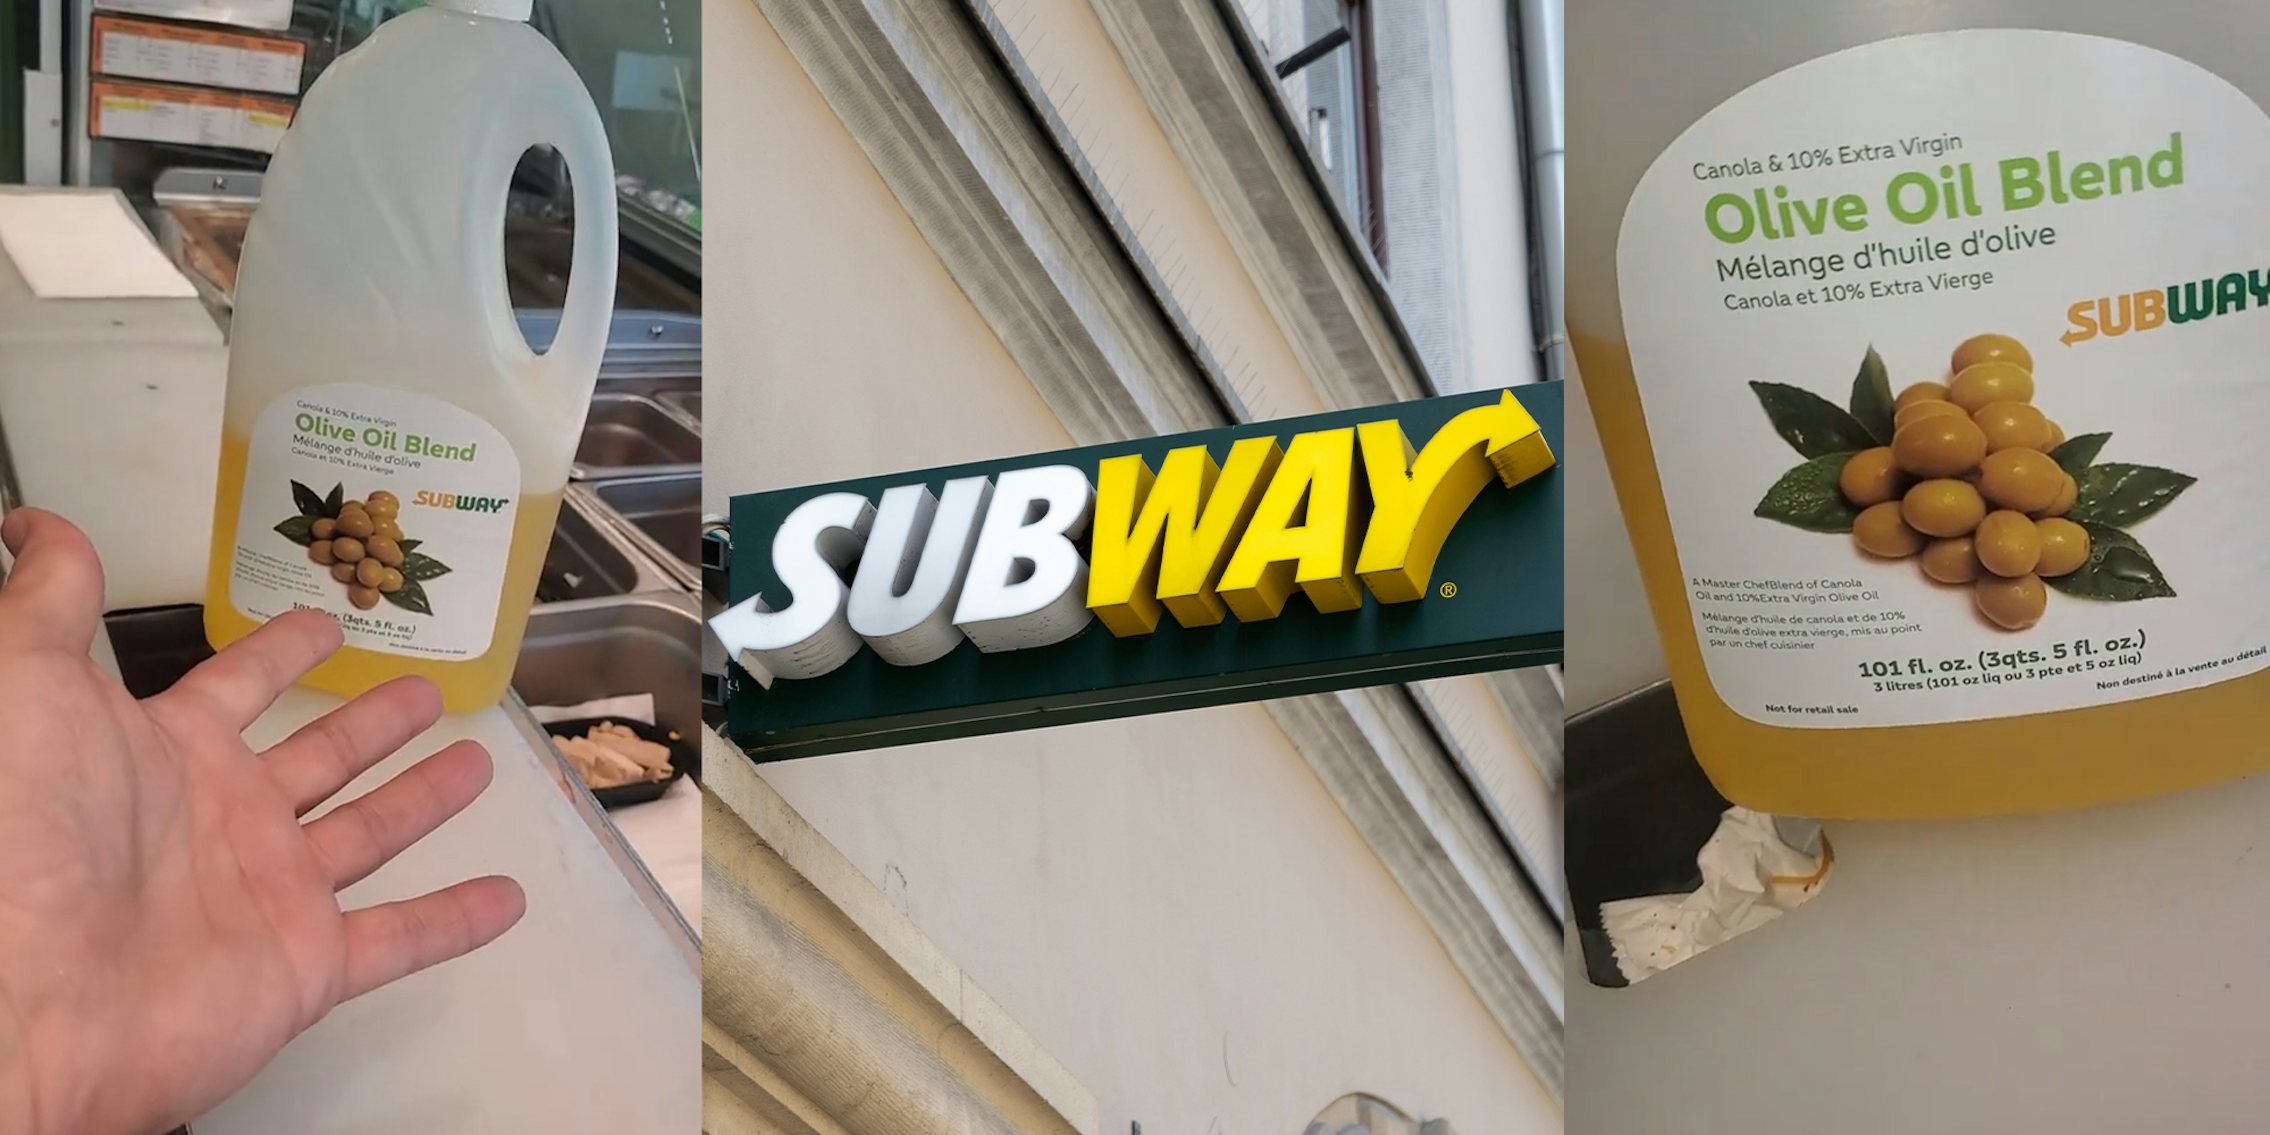 Worker says there’s barely any olive oil in the Subway olive oil